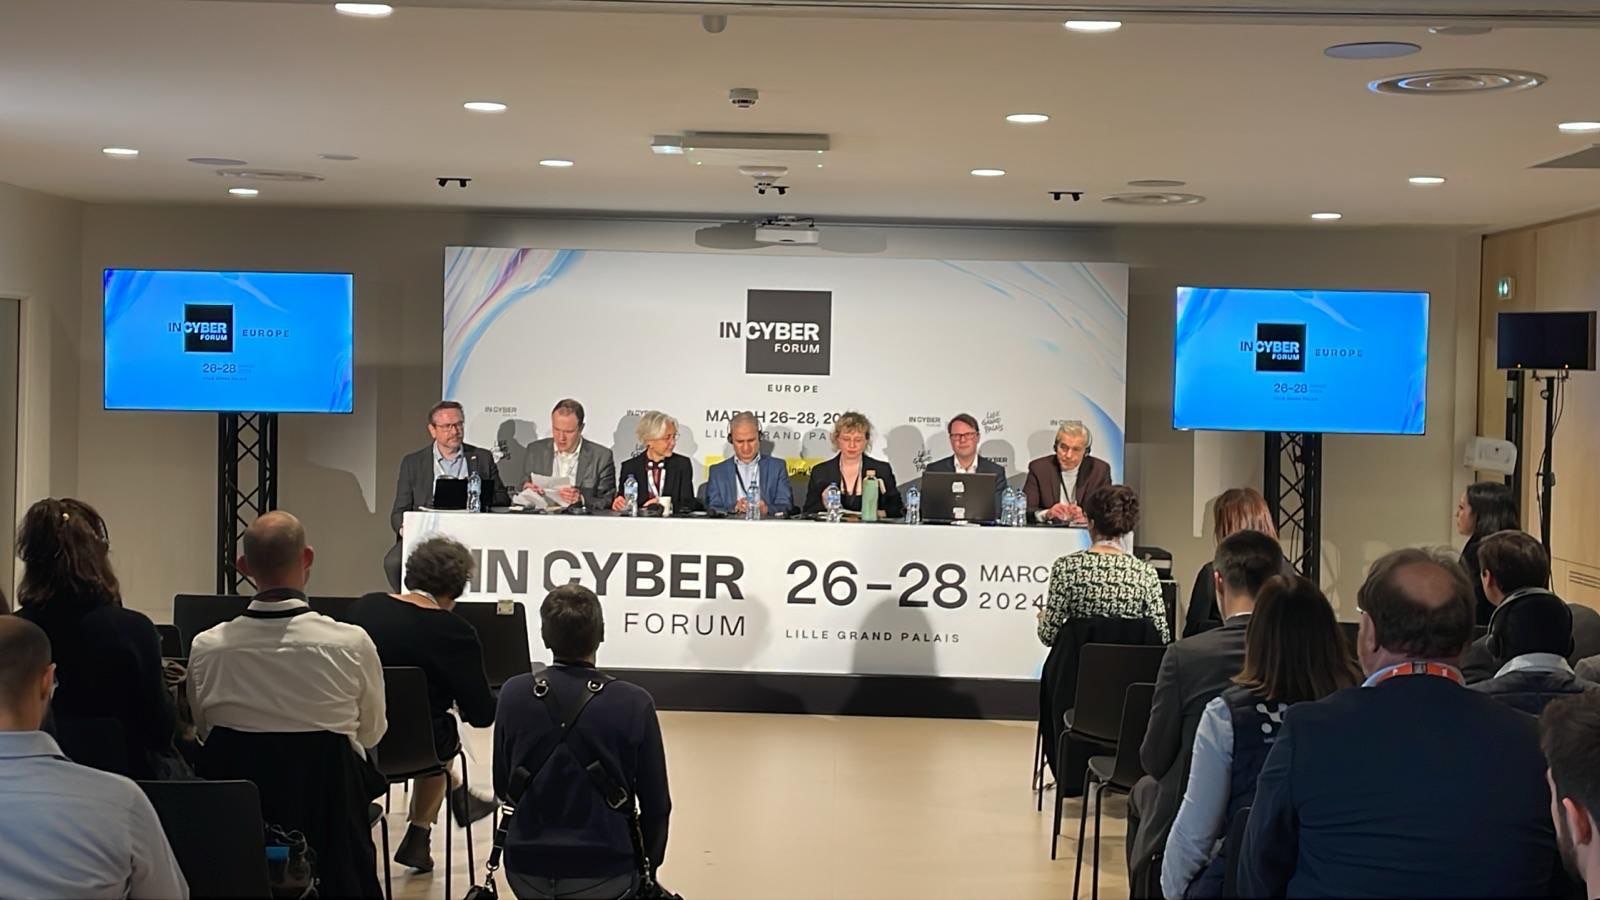 Panel discussion during InCyber Forum, Lille France, March 27, 2024